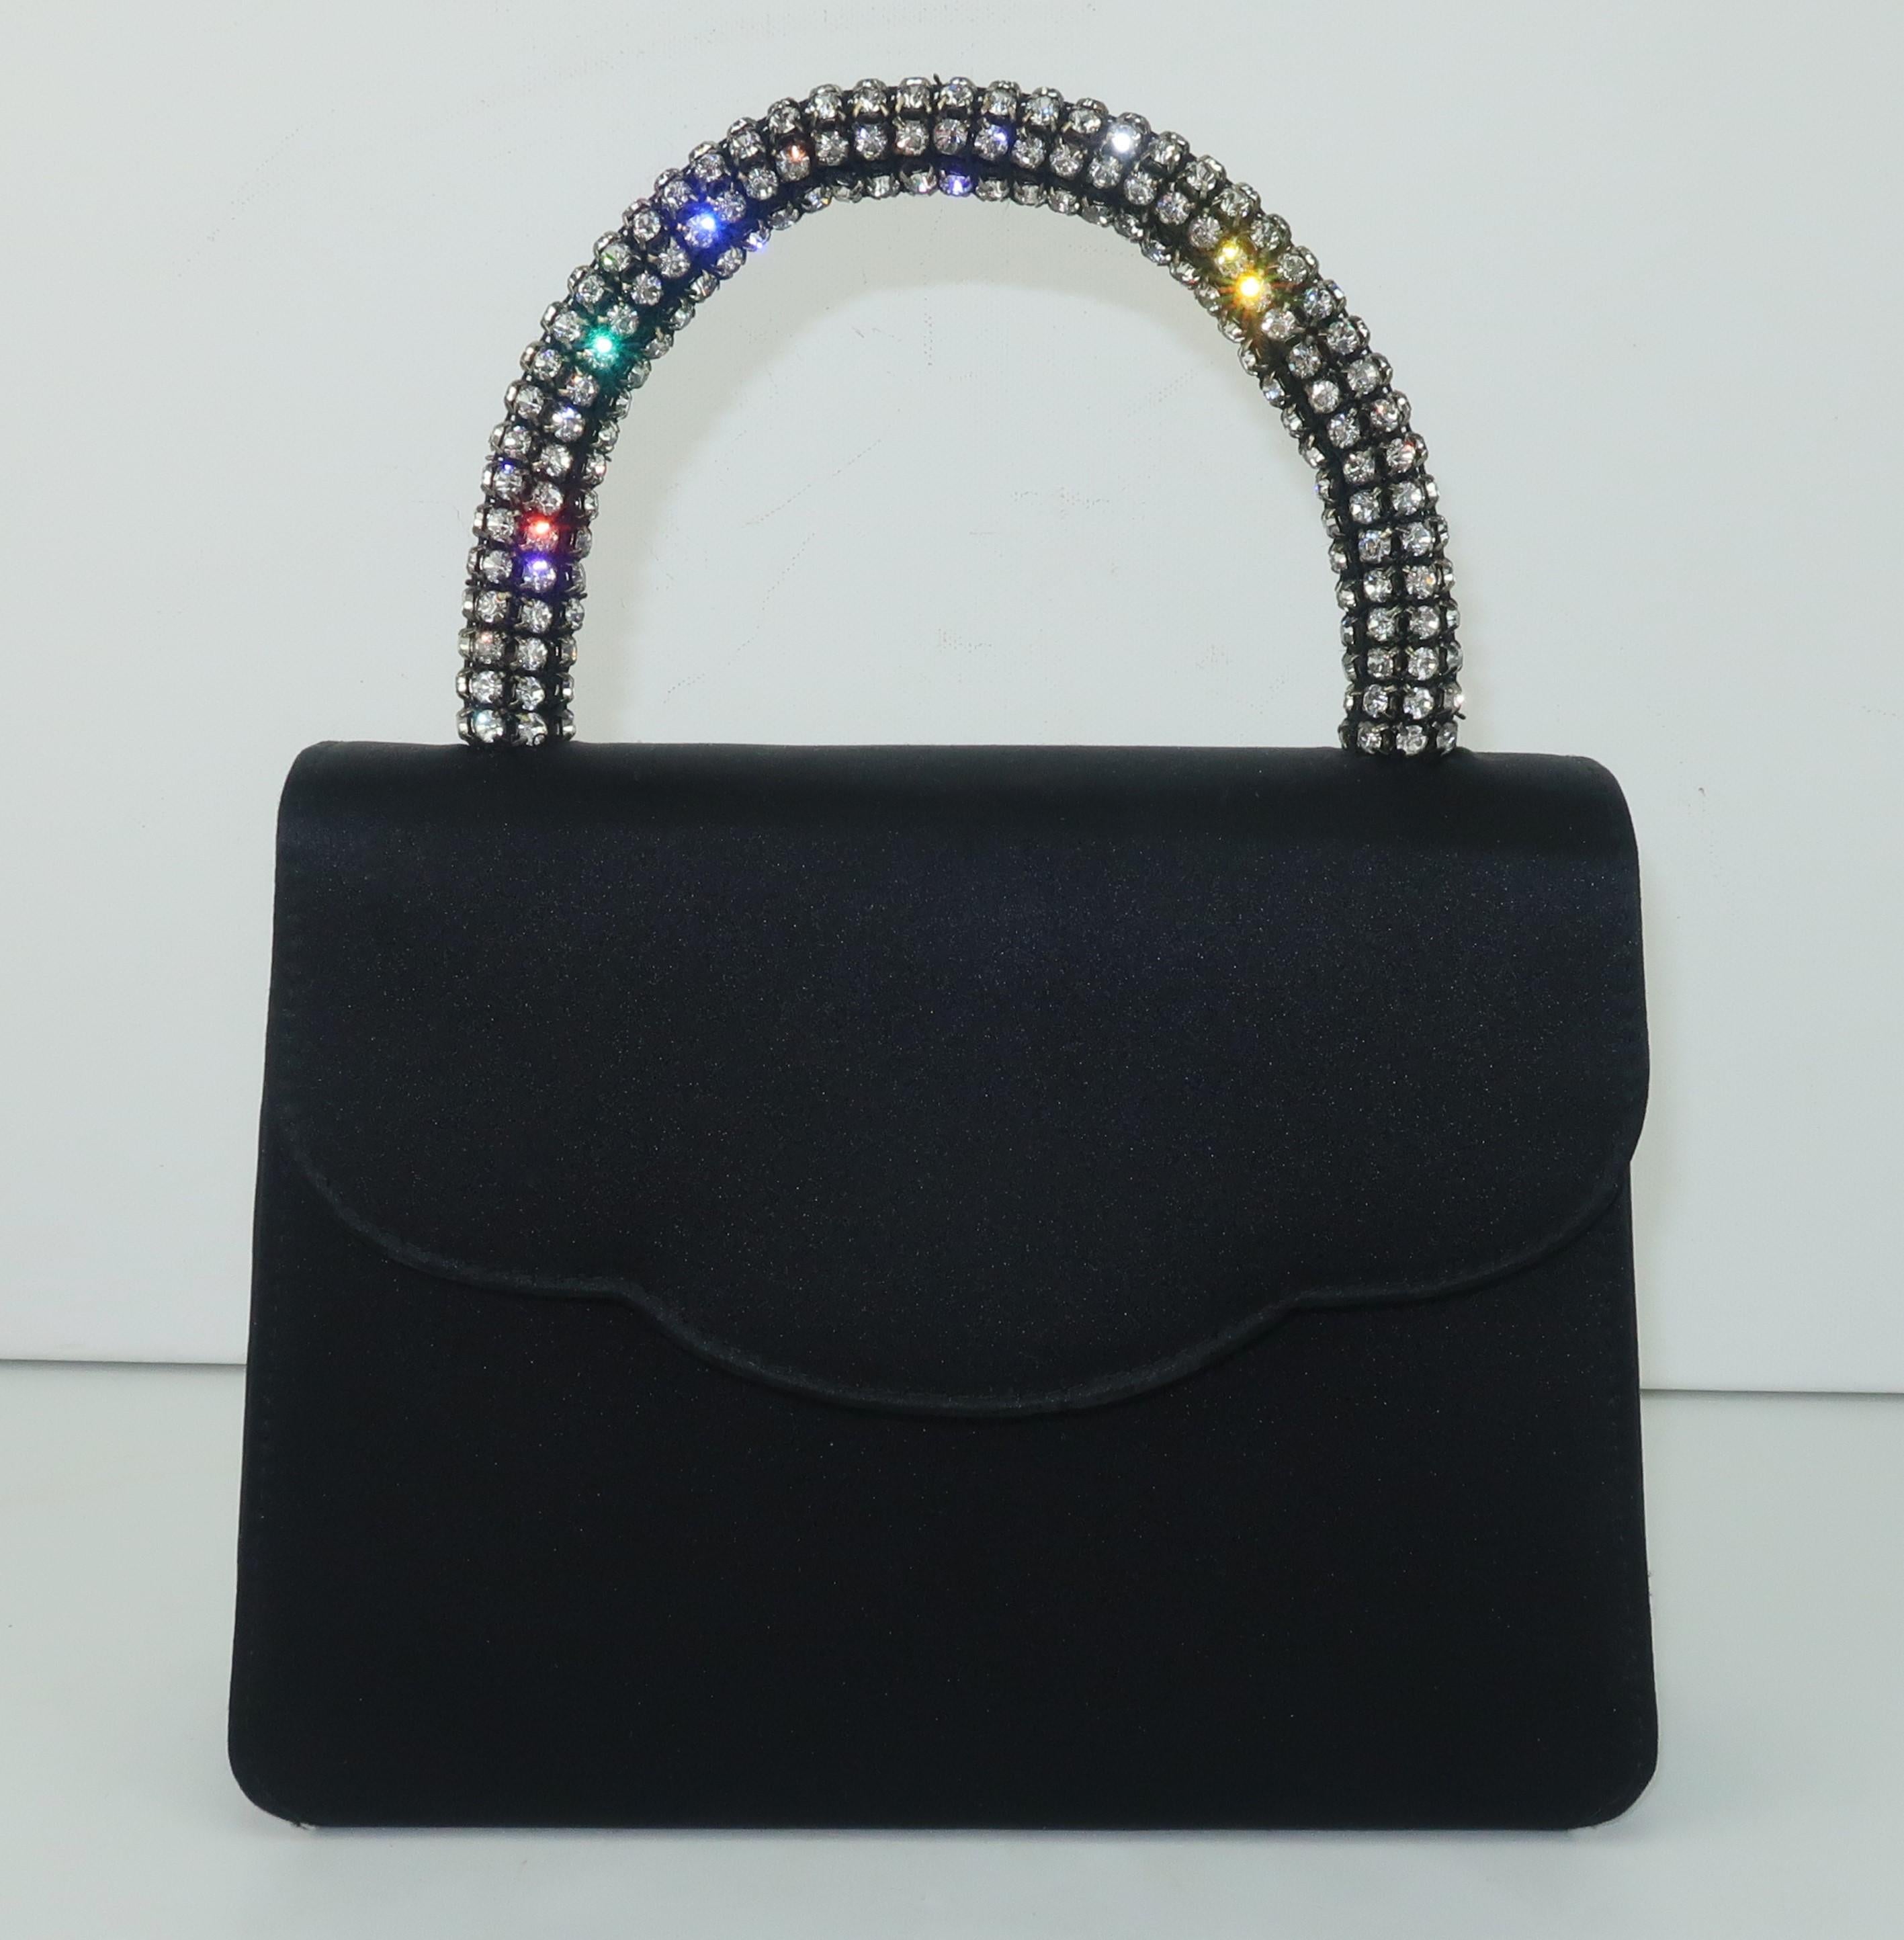 This is a wonderful little 'go to' evening handbag created by Neiman Marcus in a matte black satin fabric with a rhinestone rope top handle.  The classic silhouette is designed with glamorous vintage inspired details including a front flap closure